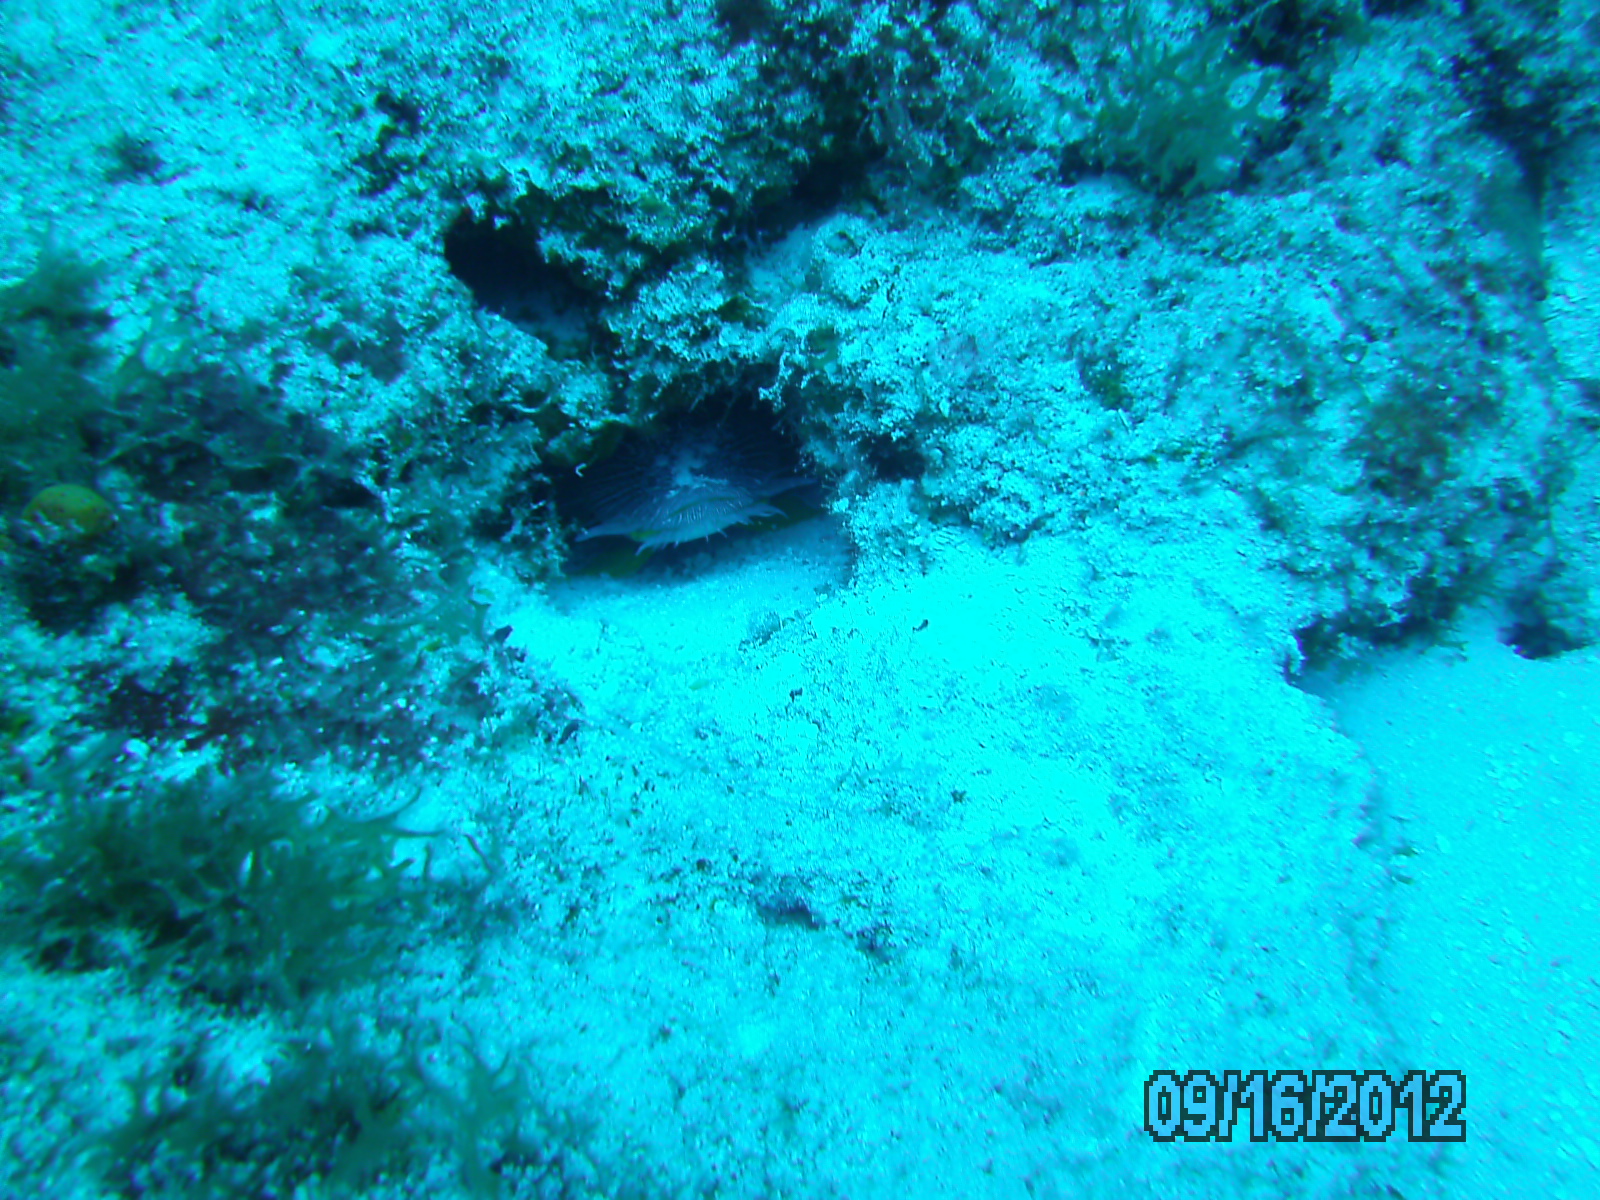 Reef fish from Sep 2012